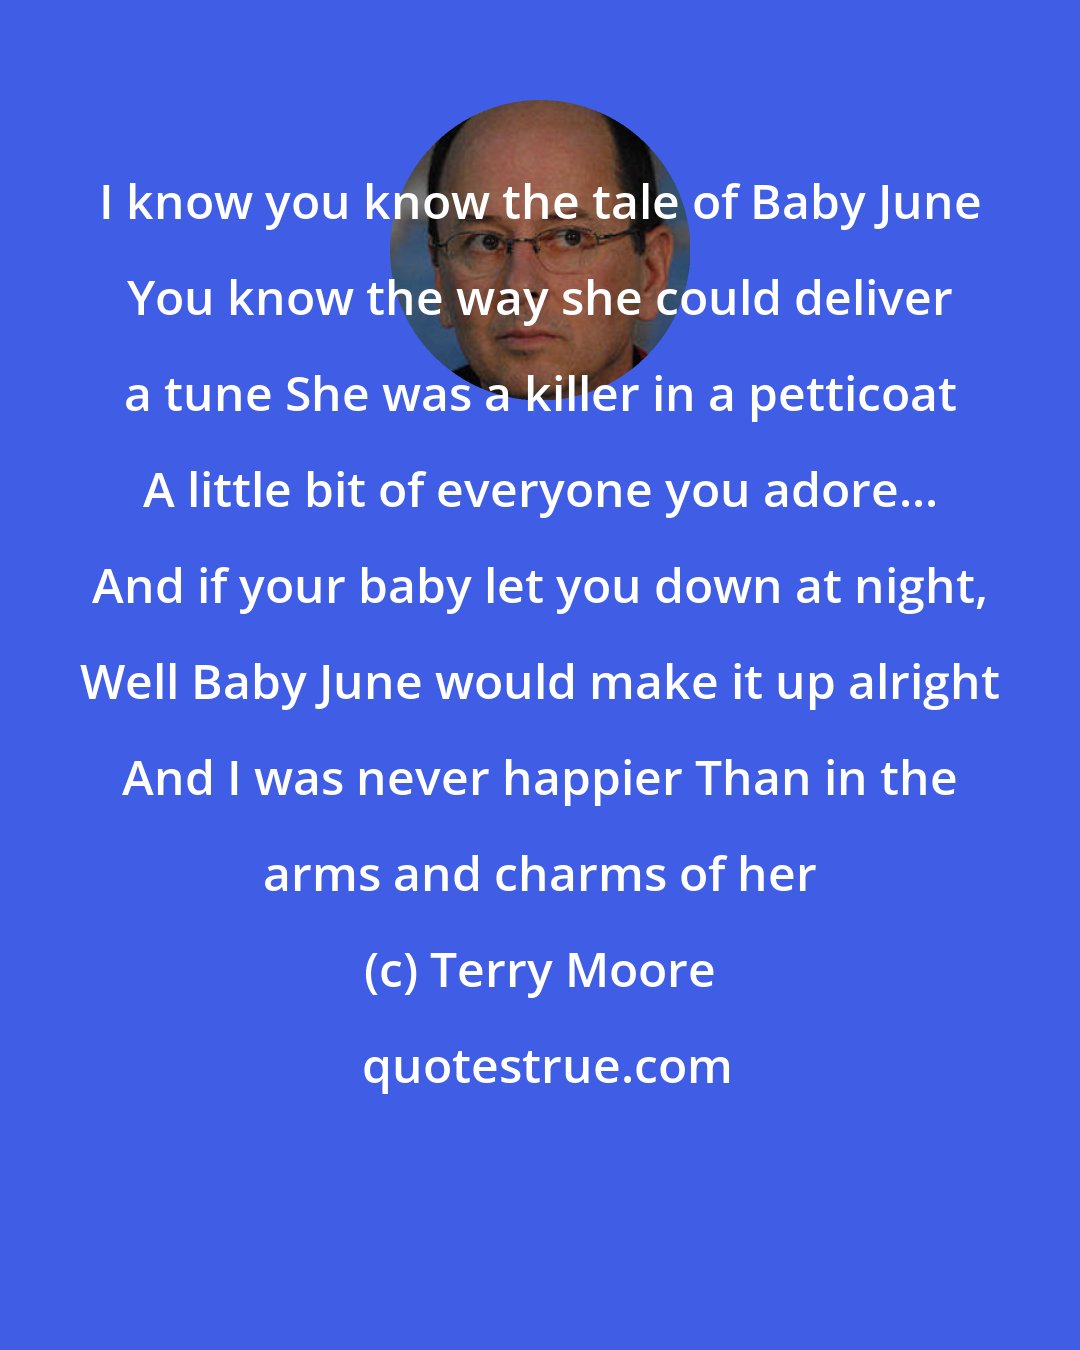 Terry Moore: I know you know the tale of Baby June You know the way she could deliver a tune She was a killer in a petticoat A little bit of everyone you adore... And if your baby let you down at night, Well Baby June would make it up alright And I was never happier Than in the arms and charms of her